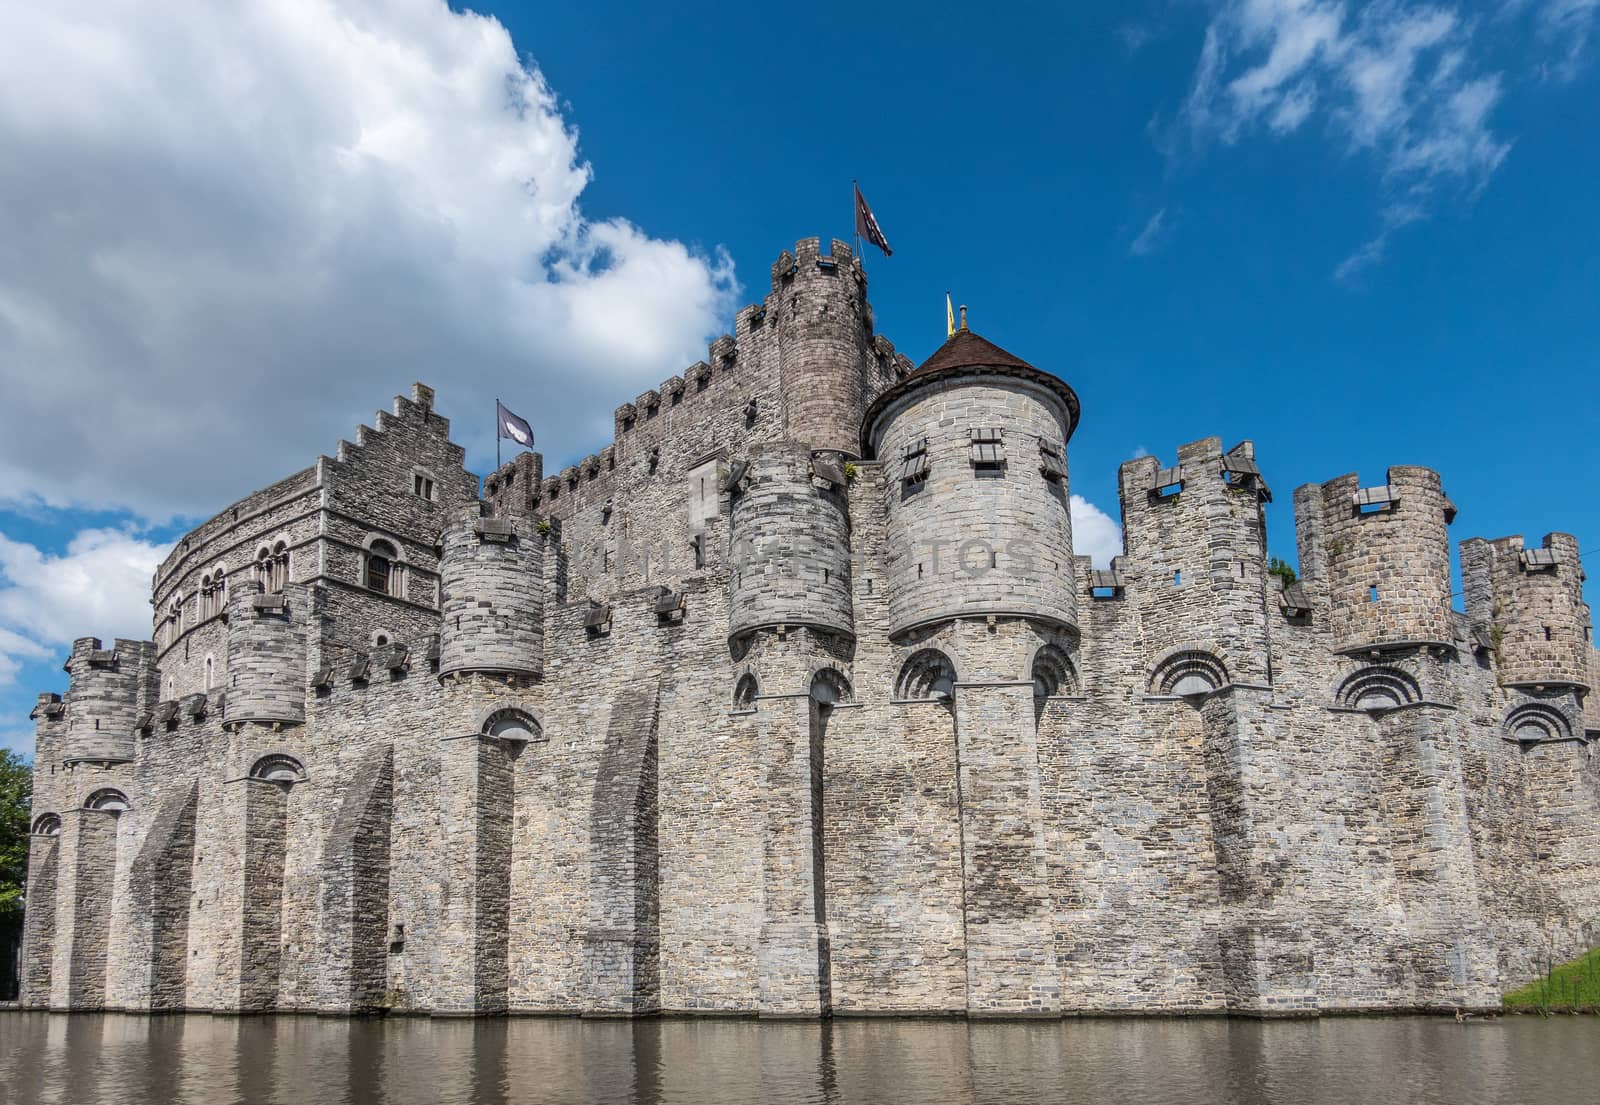 Gent, Flanders, Belgium -  June 21, 2019: Gray stone castle and ramparts of Gravensteen, historic medieval castle of city, behind its moad against blue sky with white clouds. Flags on top.